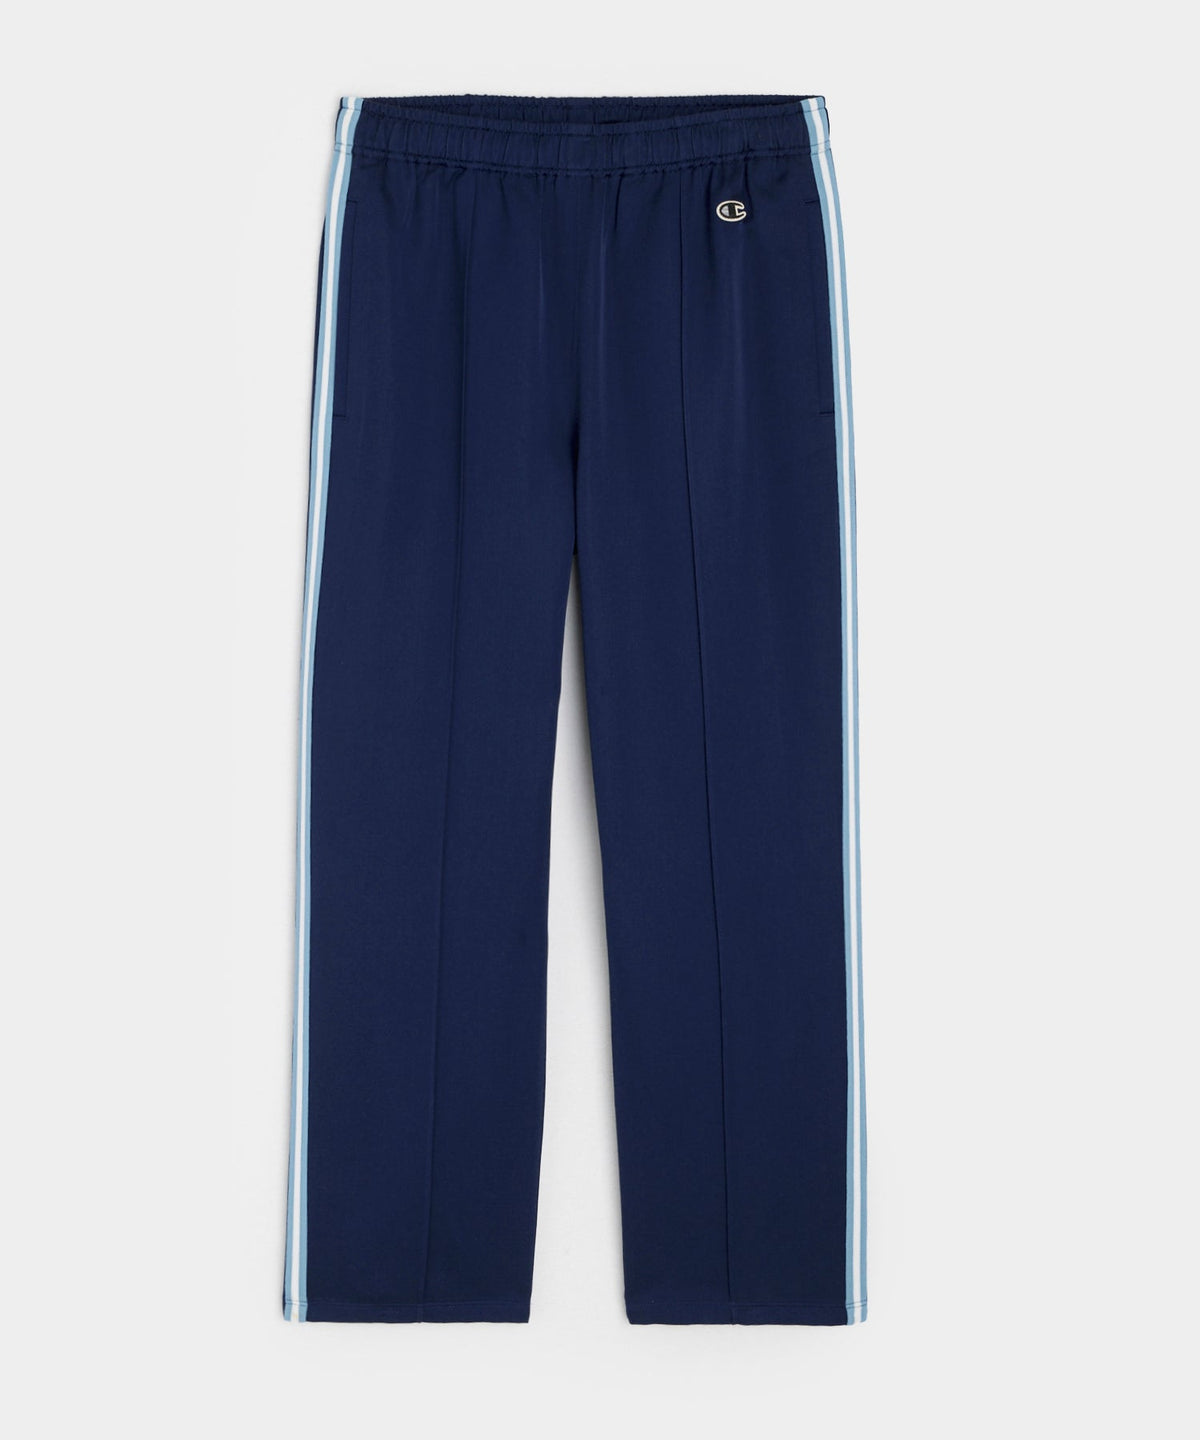 Champion Satin Pant in Classic Navy